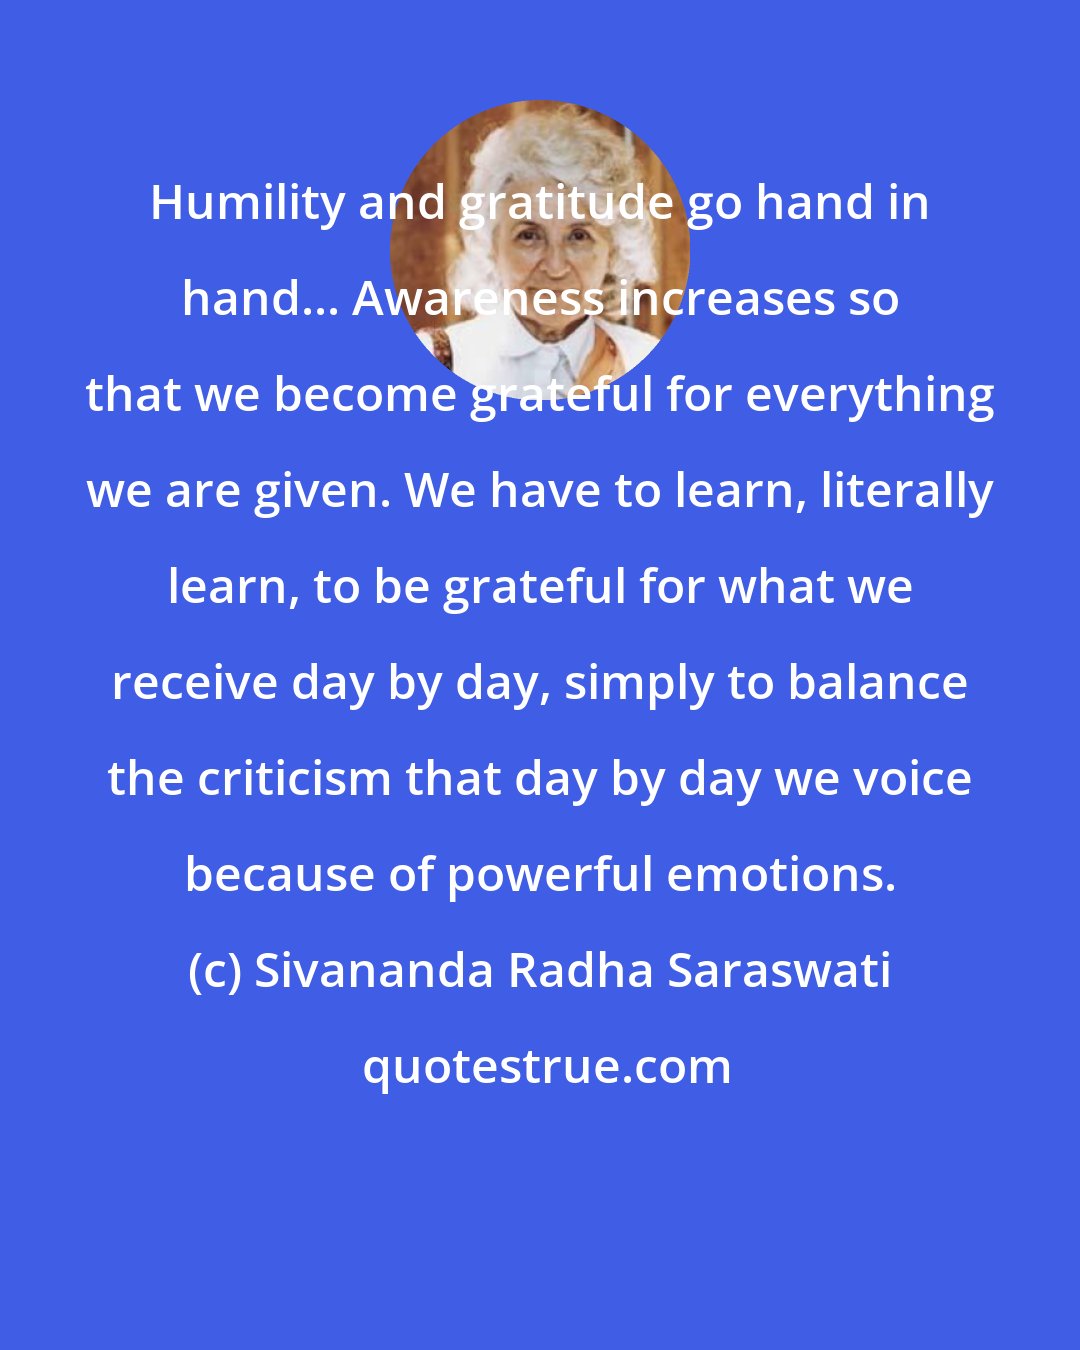 Sivananda Radha Saraswati: Humility and gratitude go hand in hand... Awareness increases so that we become grateful for everything we are given. We have to learn, literally learn, to be grateful for what we receive day by day, simply to balance the criticism that day by day we voice because of powerful emotions.